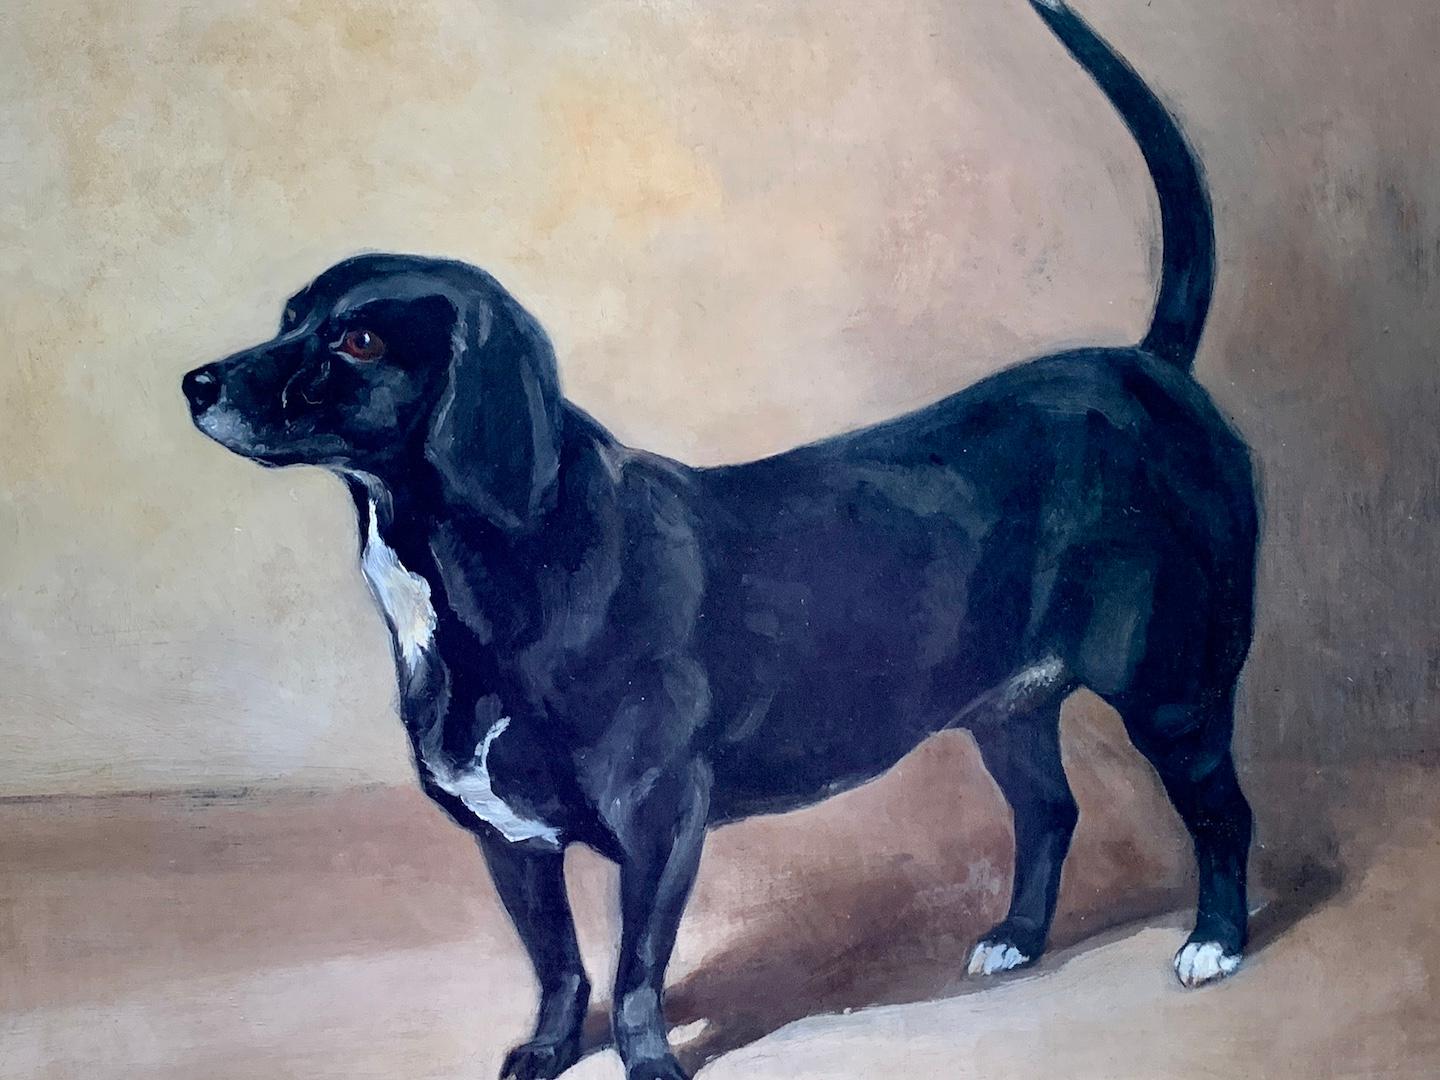 1935 English oil of a terrier dog portrait, Bonzo - Painting by W. Redworth